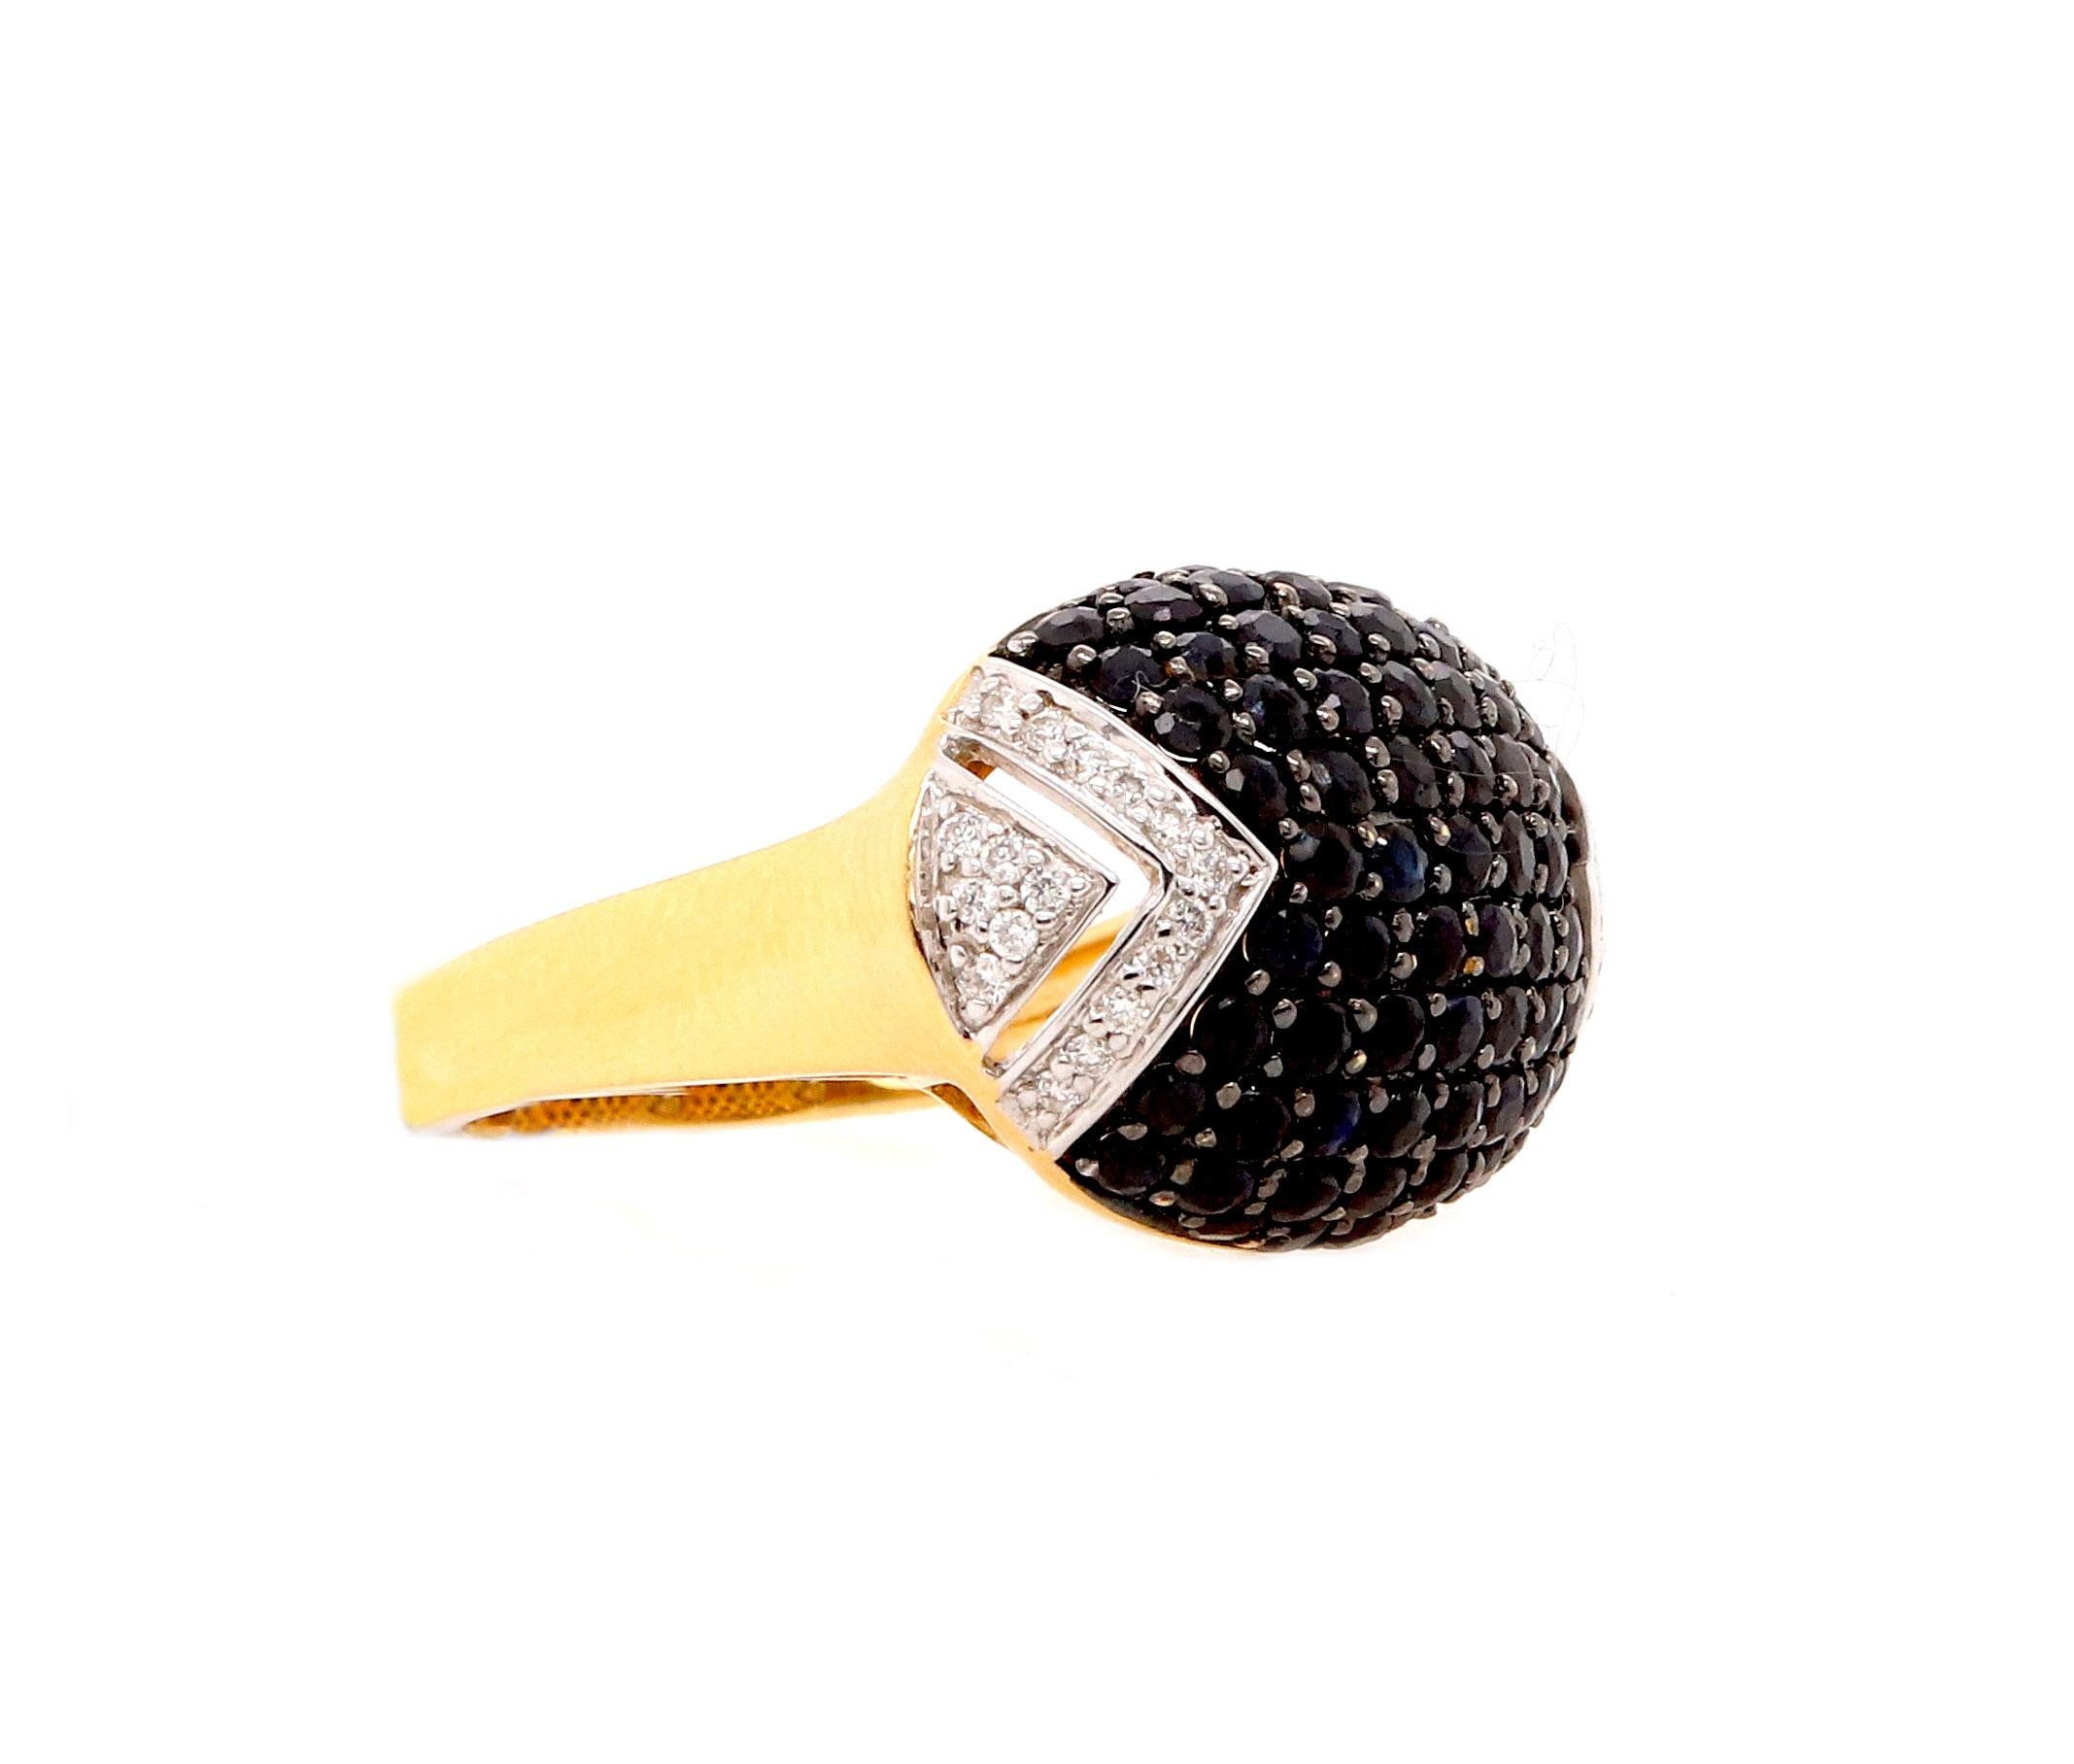 Material: 18k Two Tone Gold 
Stone Details: Round Blue Sapphires at 2.13 Carats
Diamond Details: Round White Diamonds at Approximately 0.16 Carats - Clarity: SI / Color: H-I
Ring Size: 6.75 (Can be sized)

Matching Pendant: 2.9 Carat Sapphire and